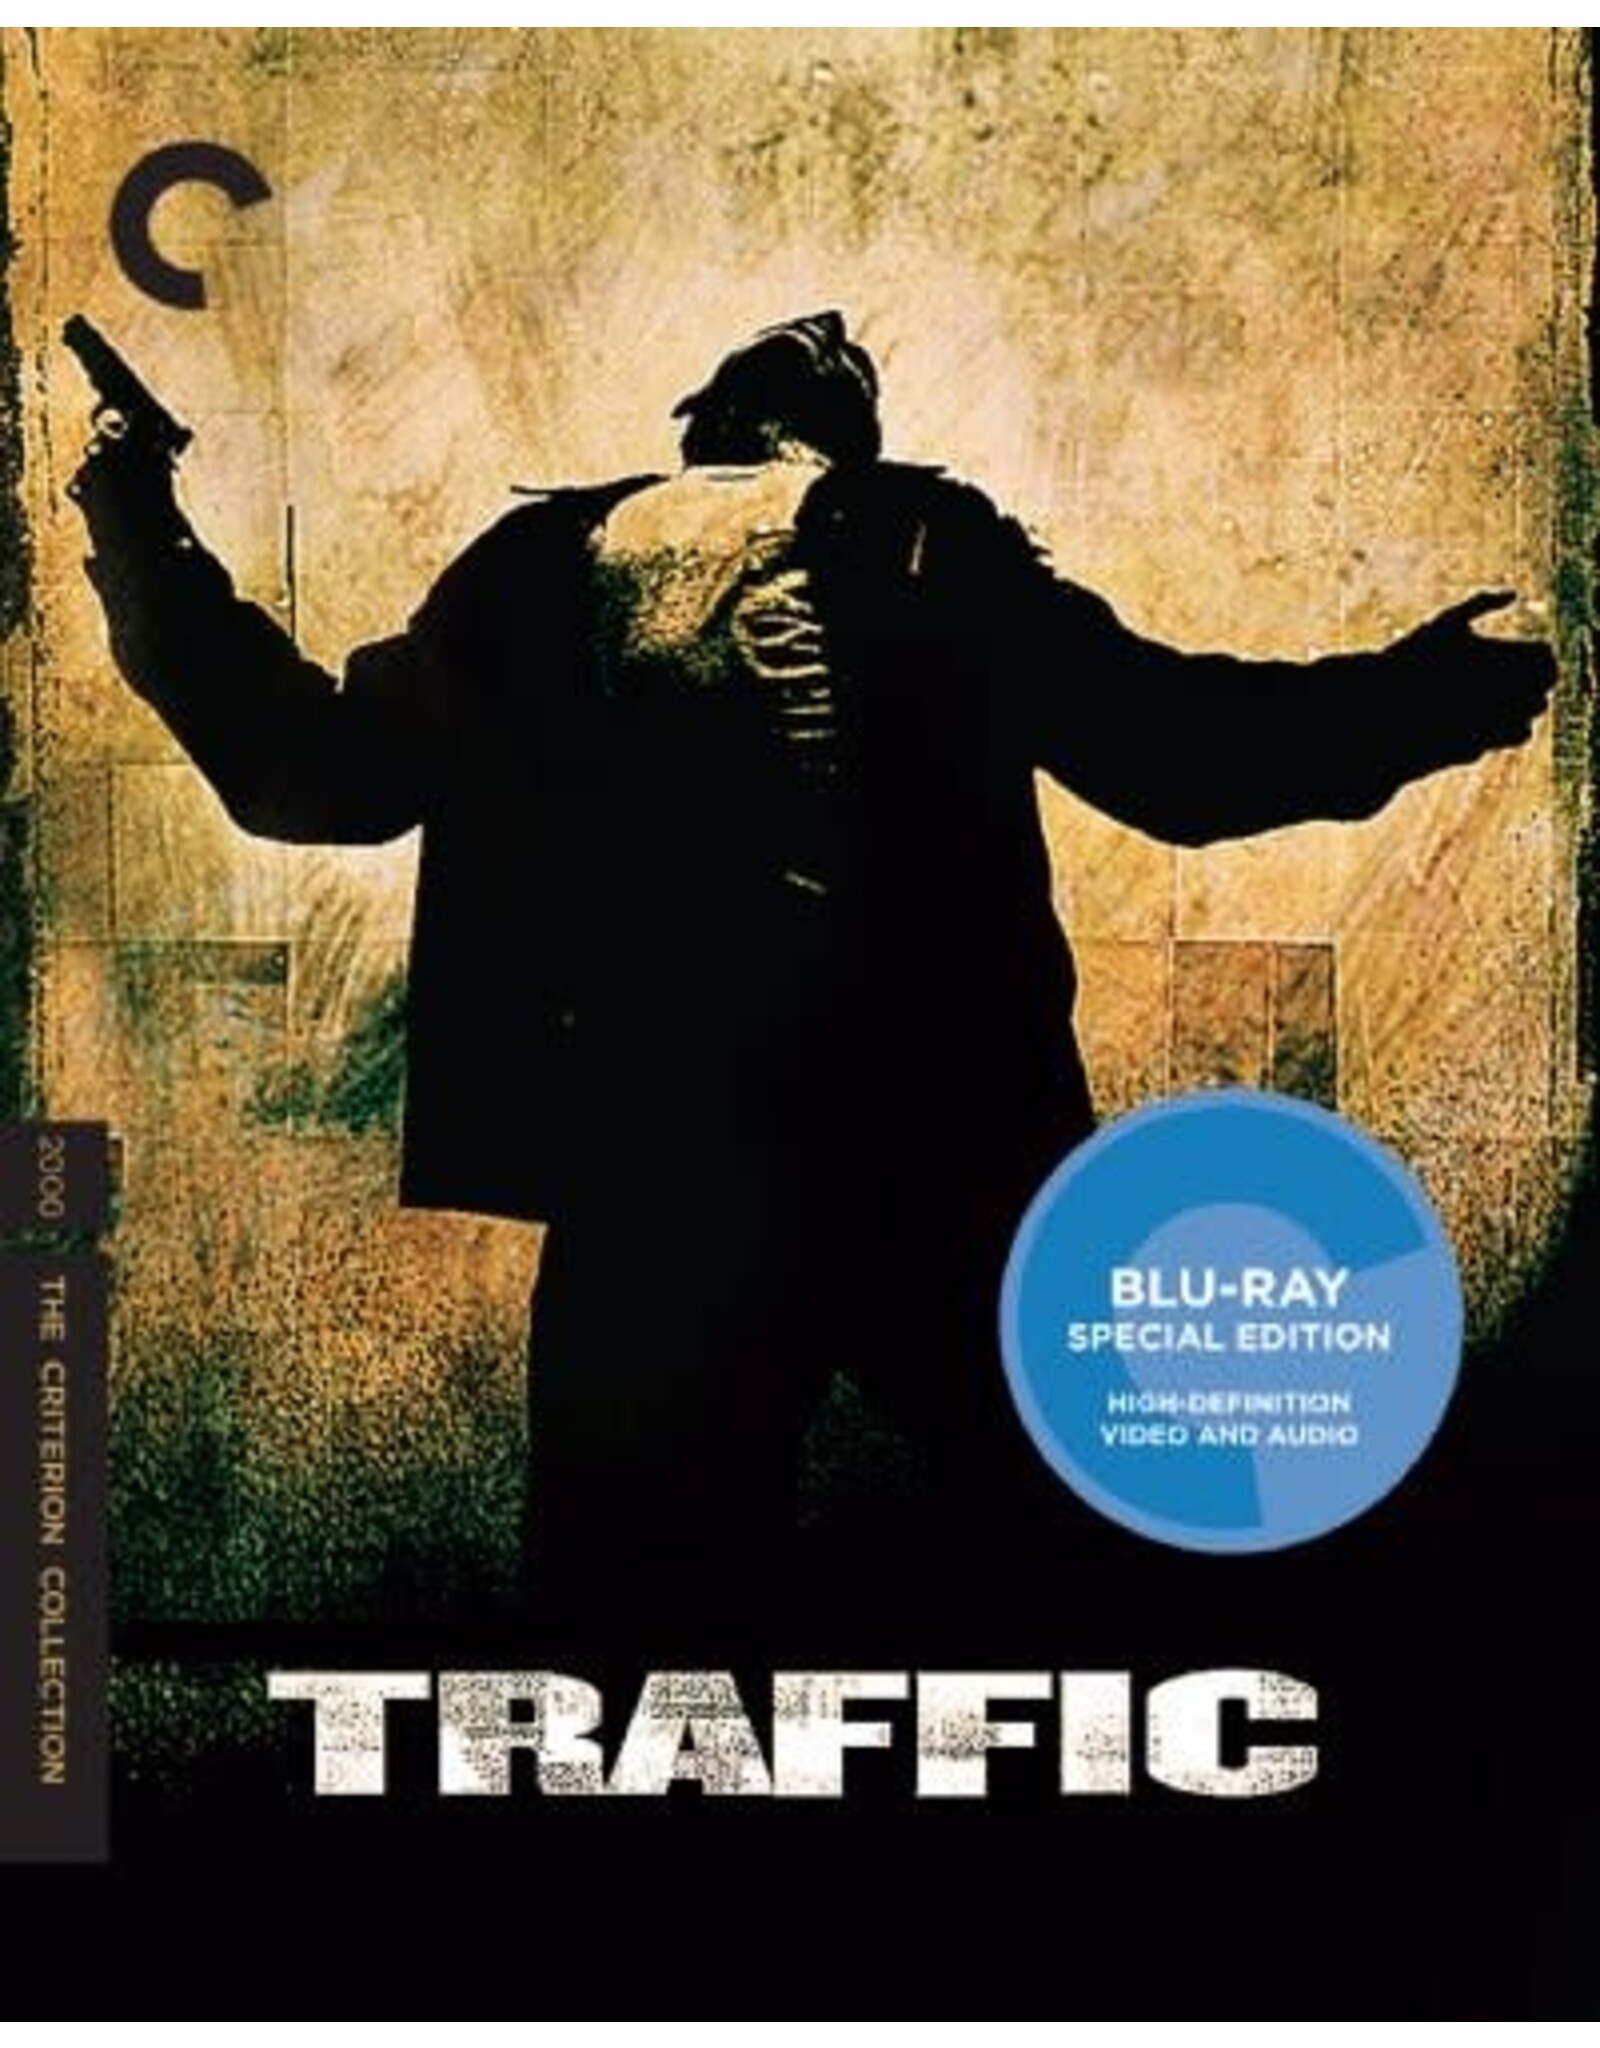 Criterion Collection Traffic - Criterion Collection (Brand New)